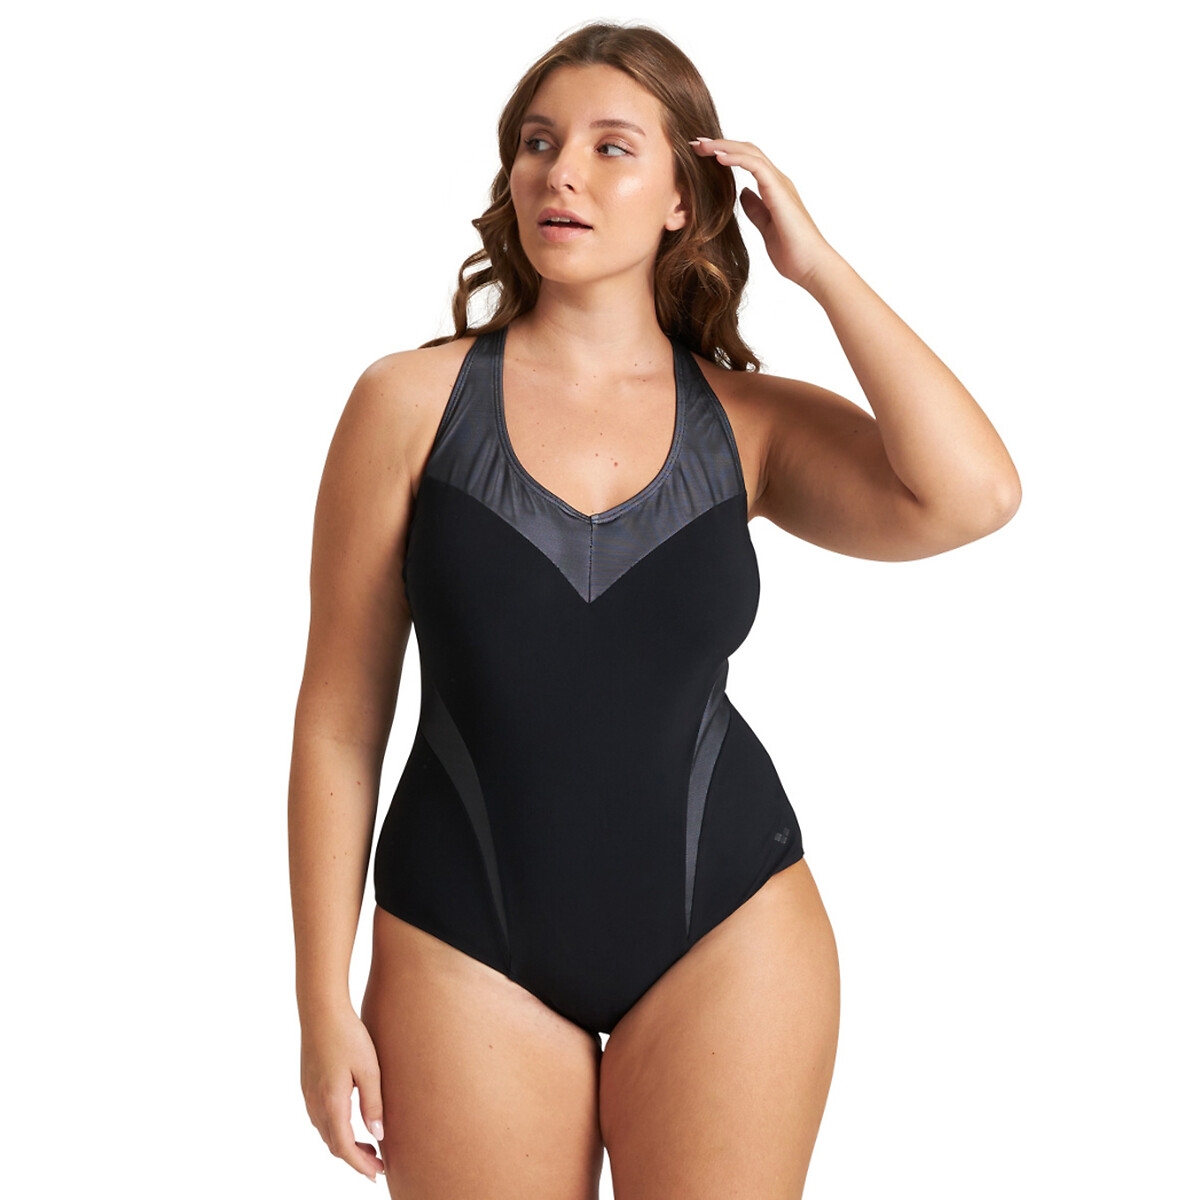 Isabel Pool Swimsuit